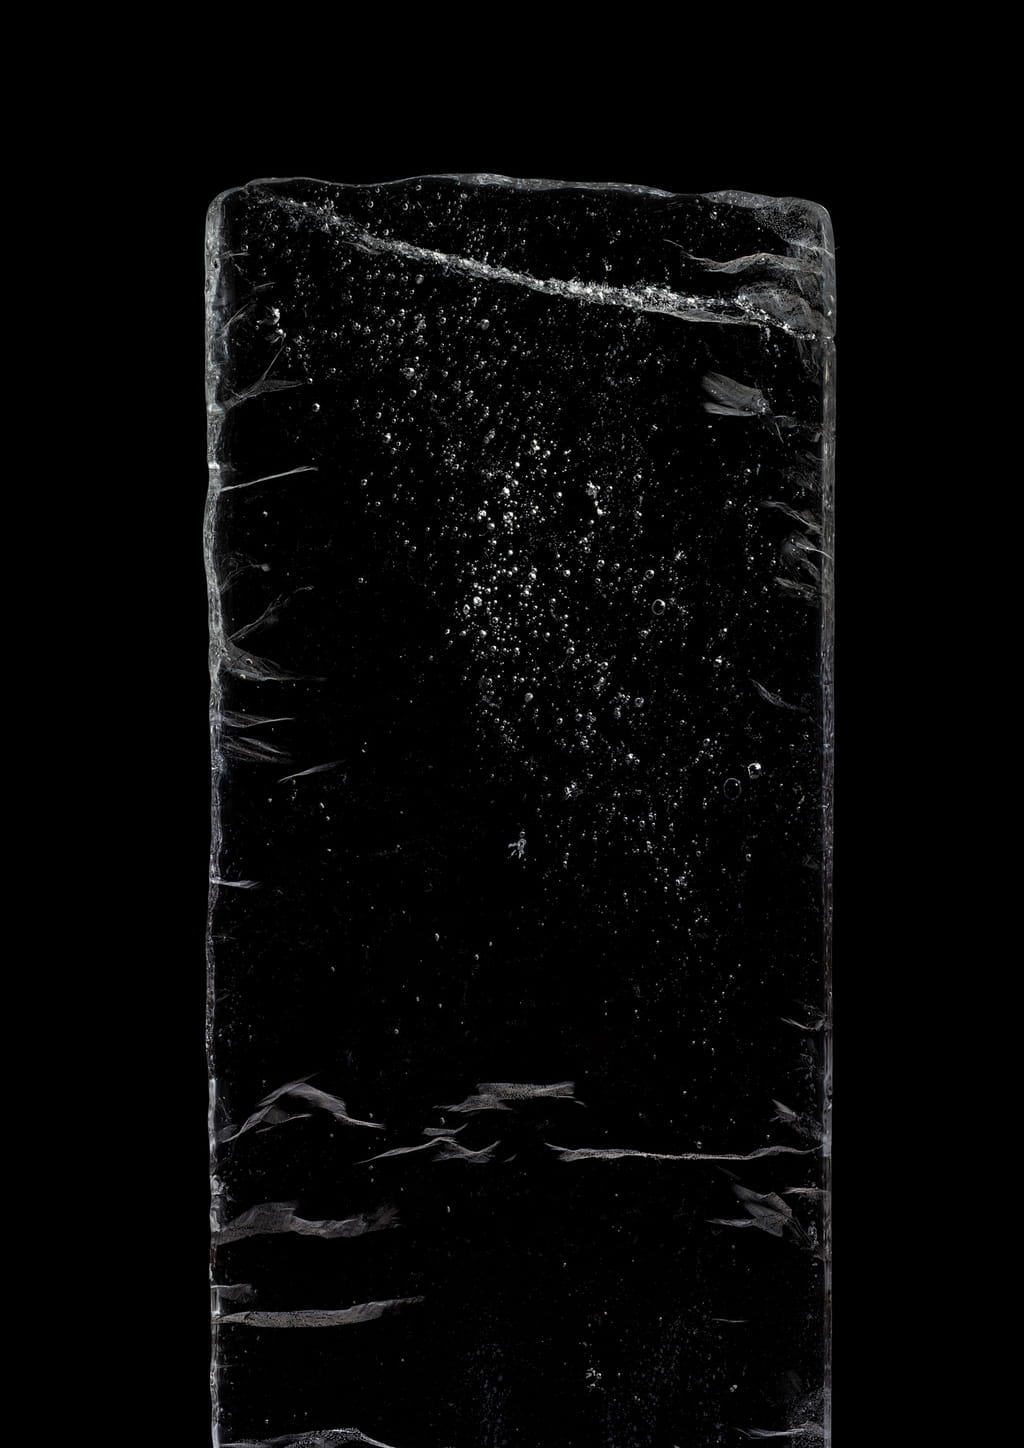 Photo of a block of ice against a black background, showing a small amount of bubbles in it with different sizes.